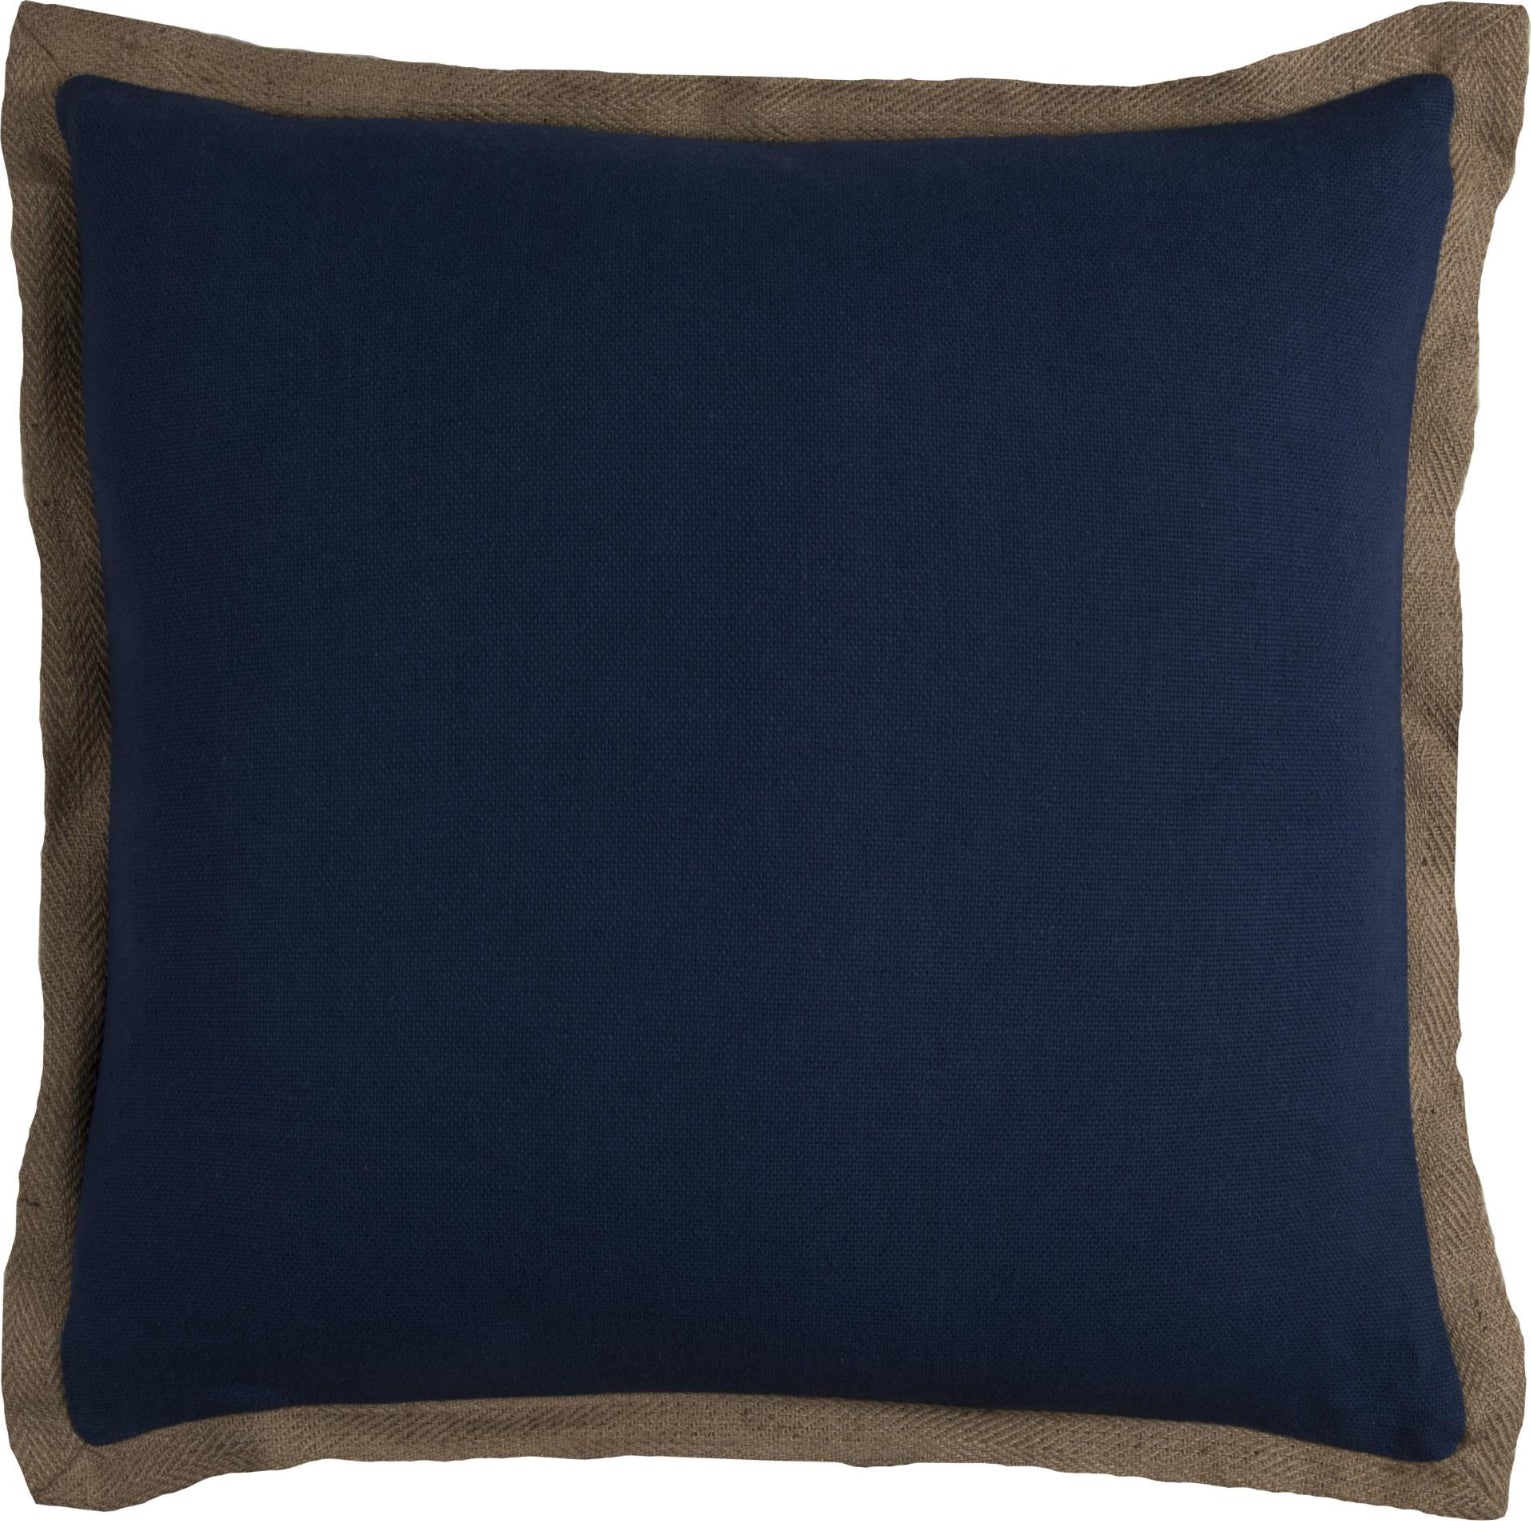 Rizzy Pillows T10509 Navy